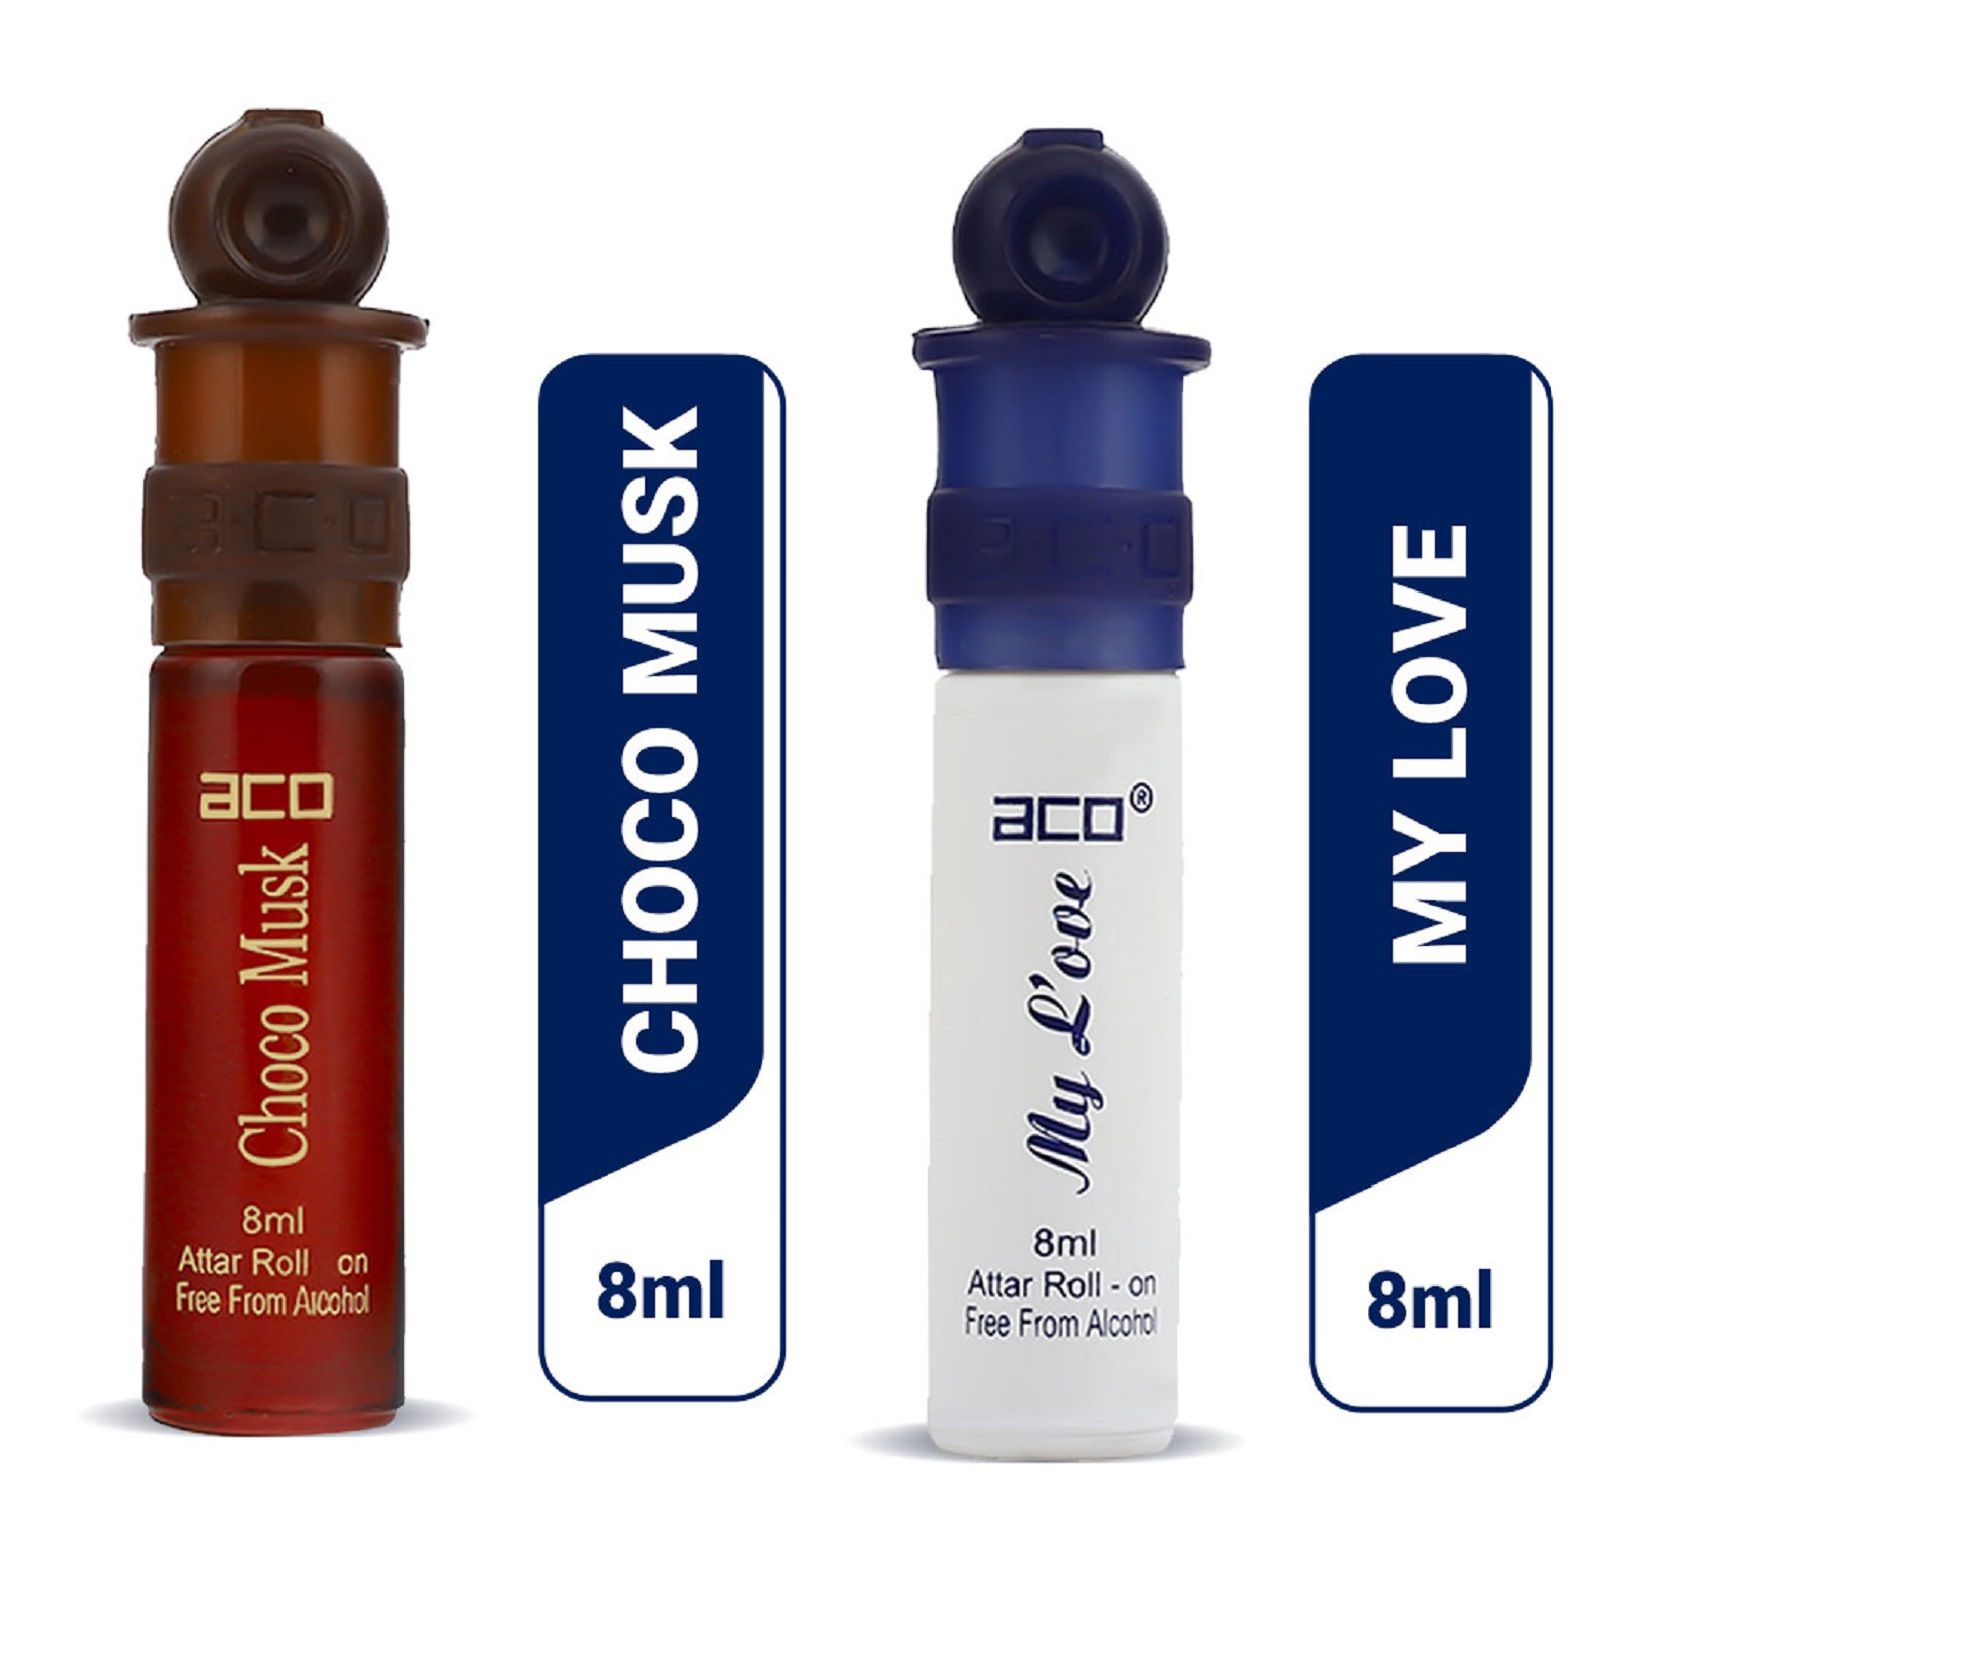     			aco perfumes choco Musk & My love Concentrated  Attar Roll On 8ml COMBO SET